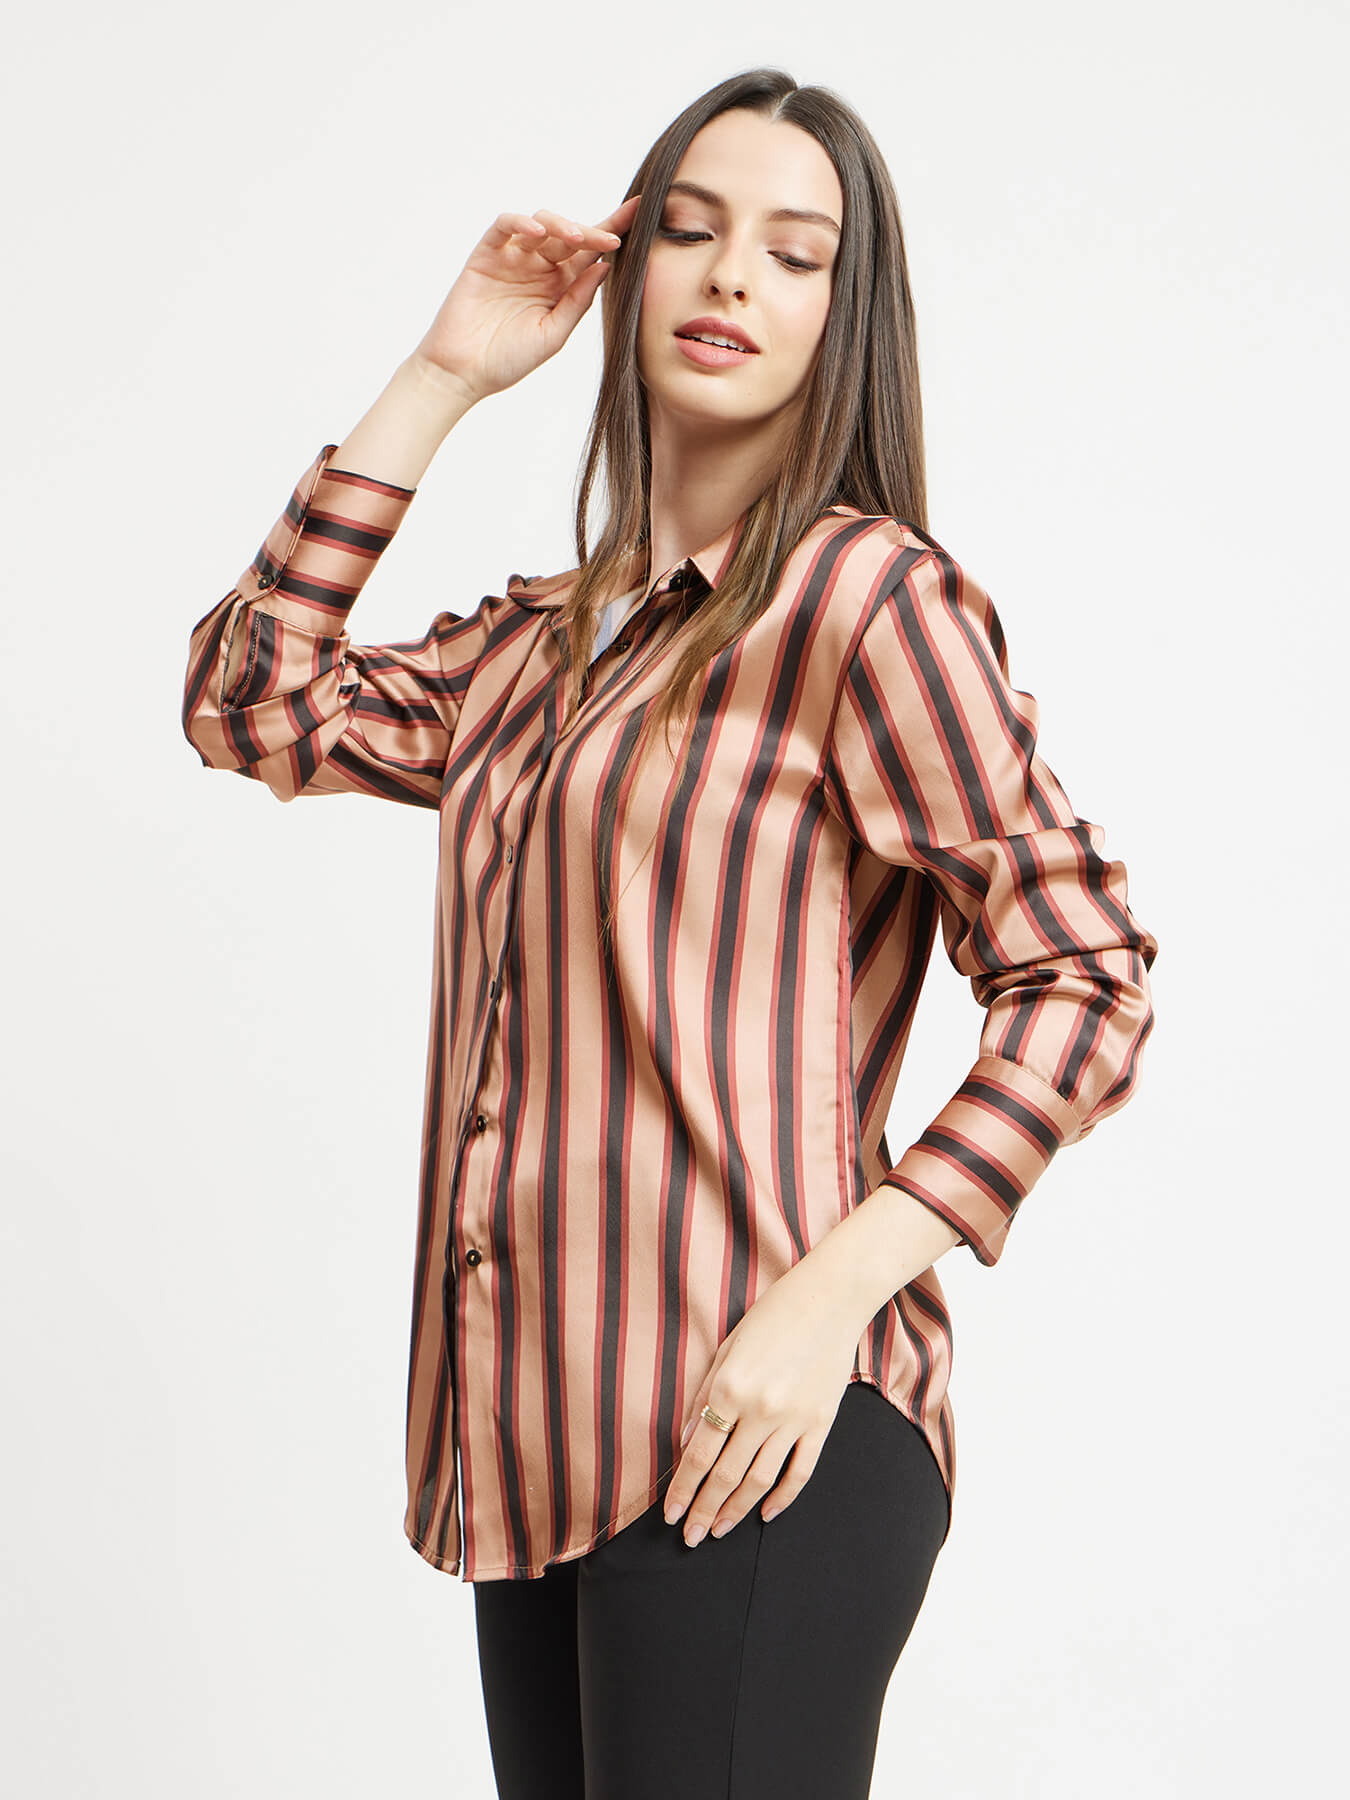 Satin Stripes Shirt - Brown And Beige